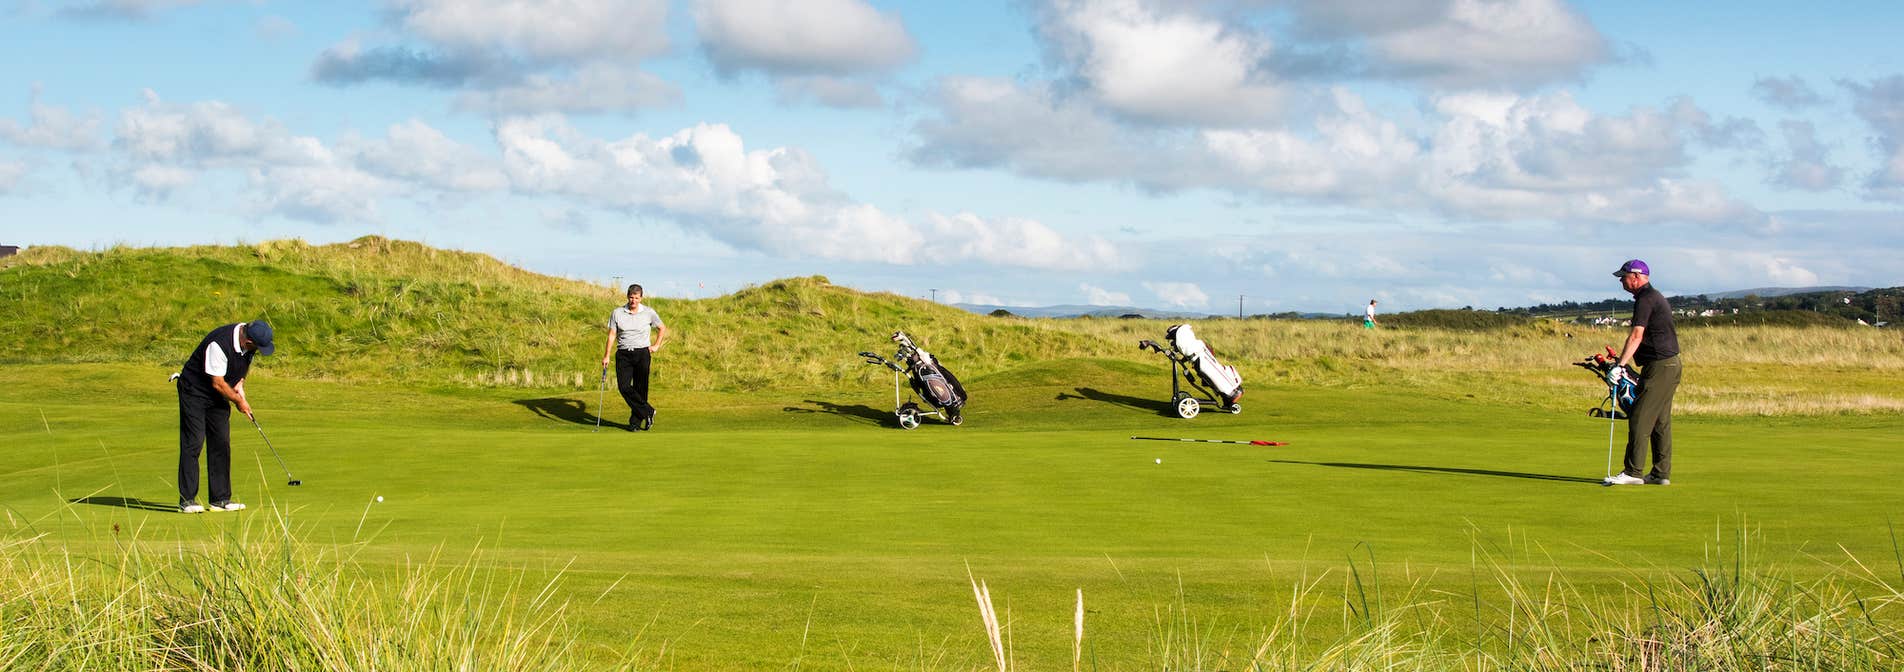 Three golfers at Ballyliffin Golf Course in County Donegal